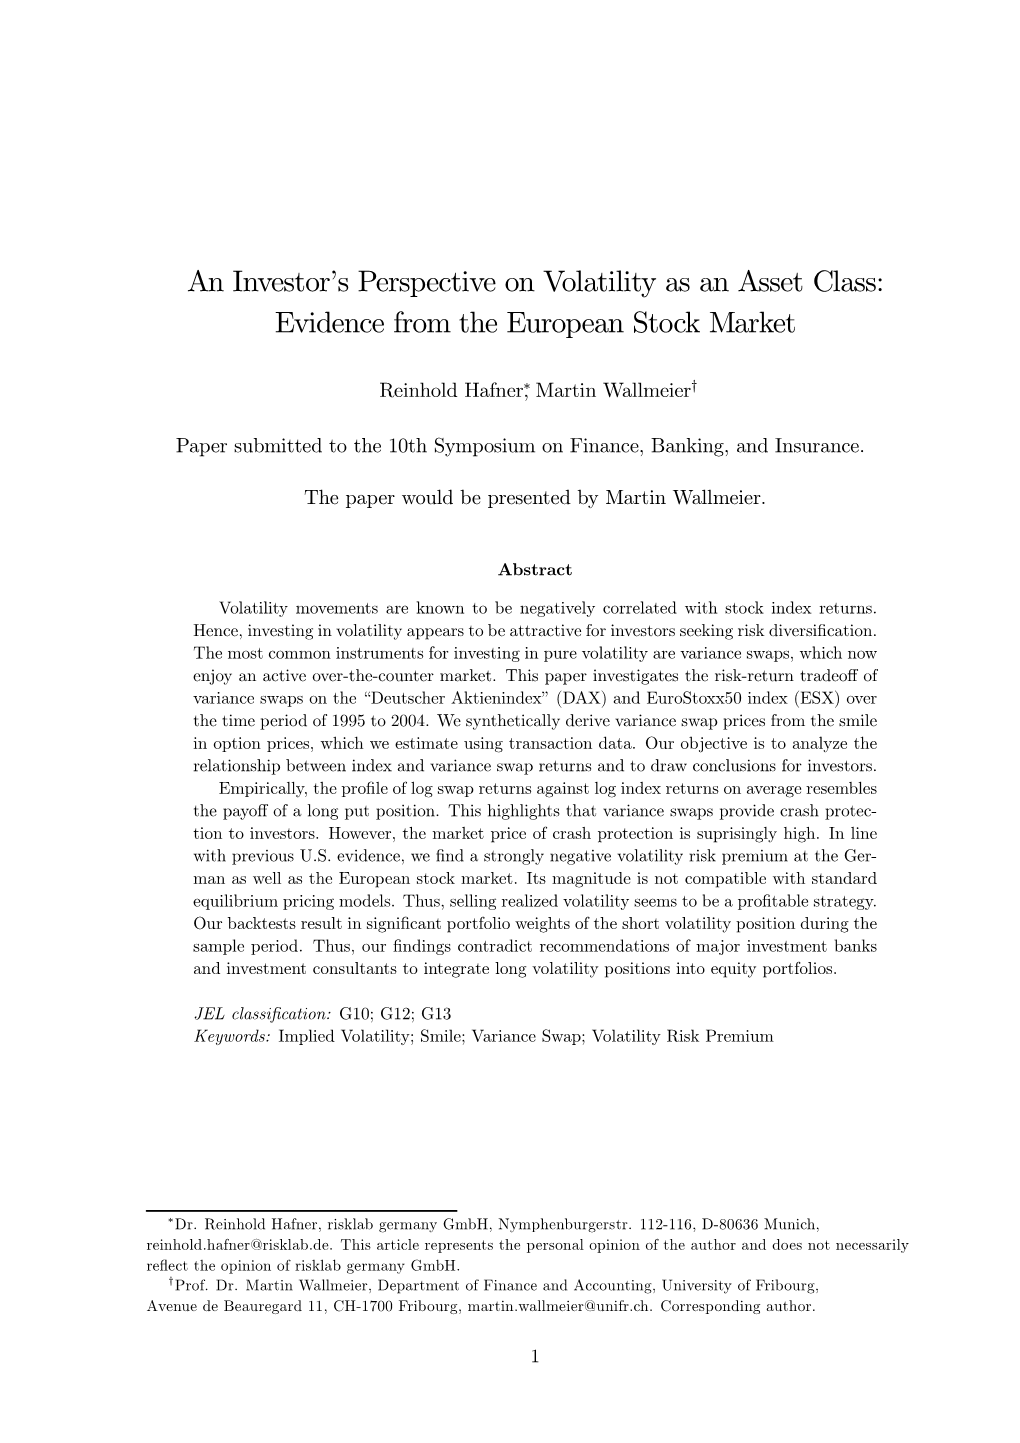 An Investor's Perspective on Volatility As an Asset Class: Evidence From